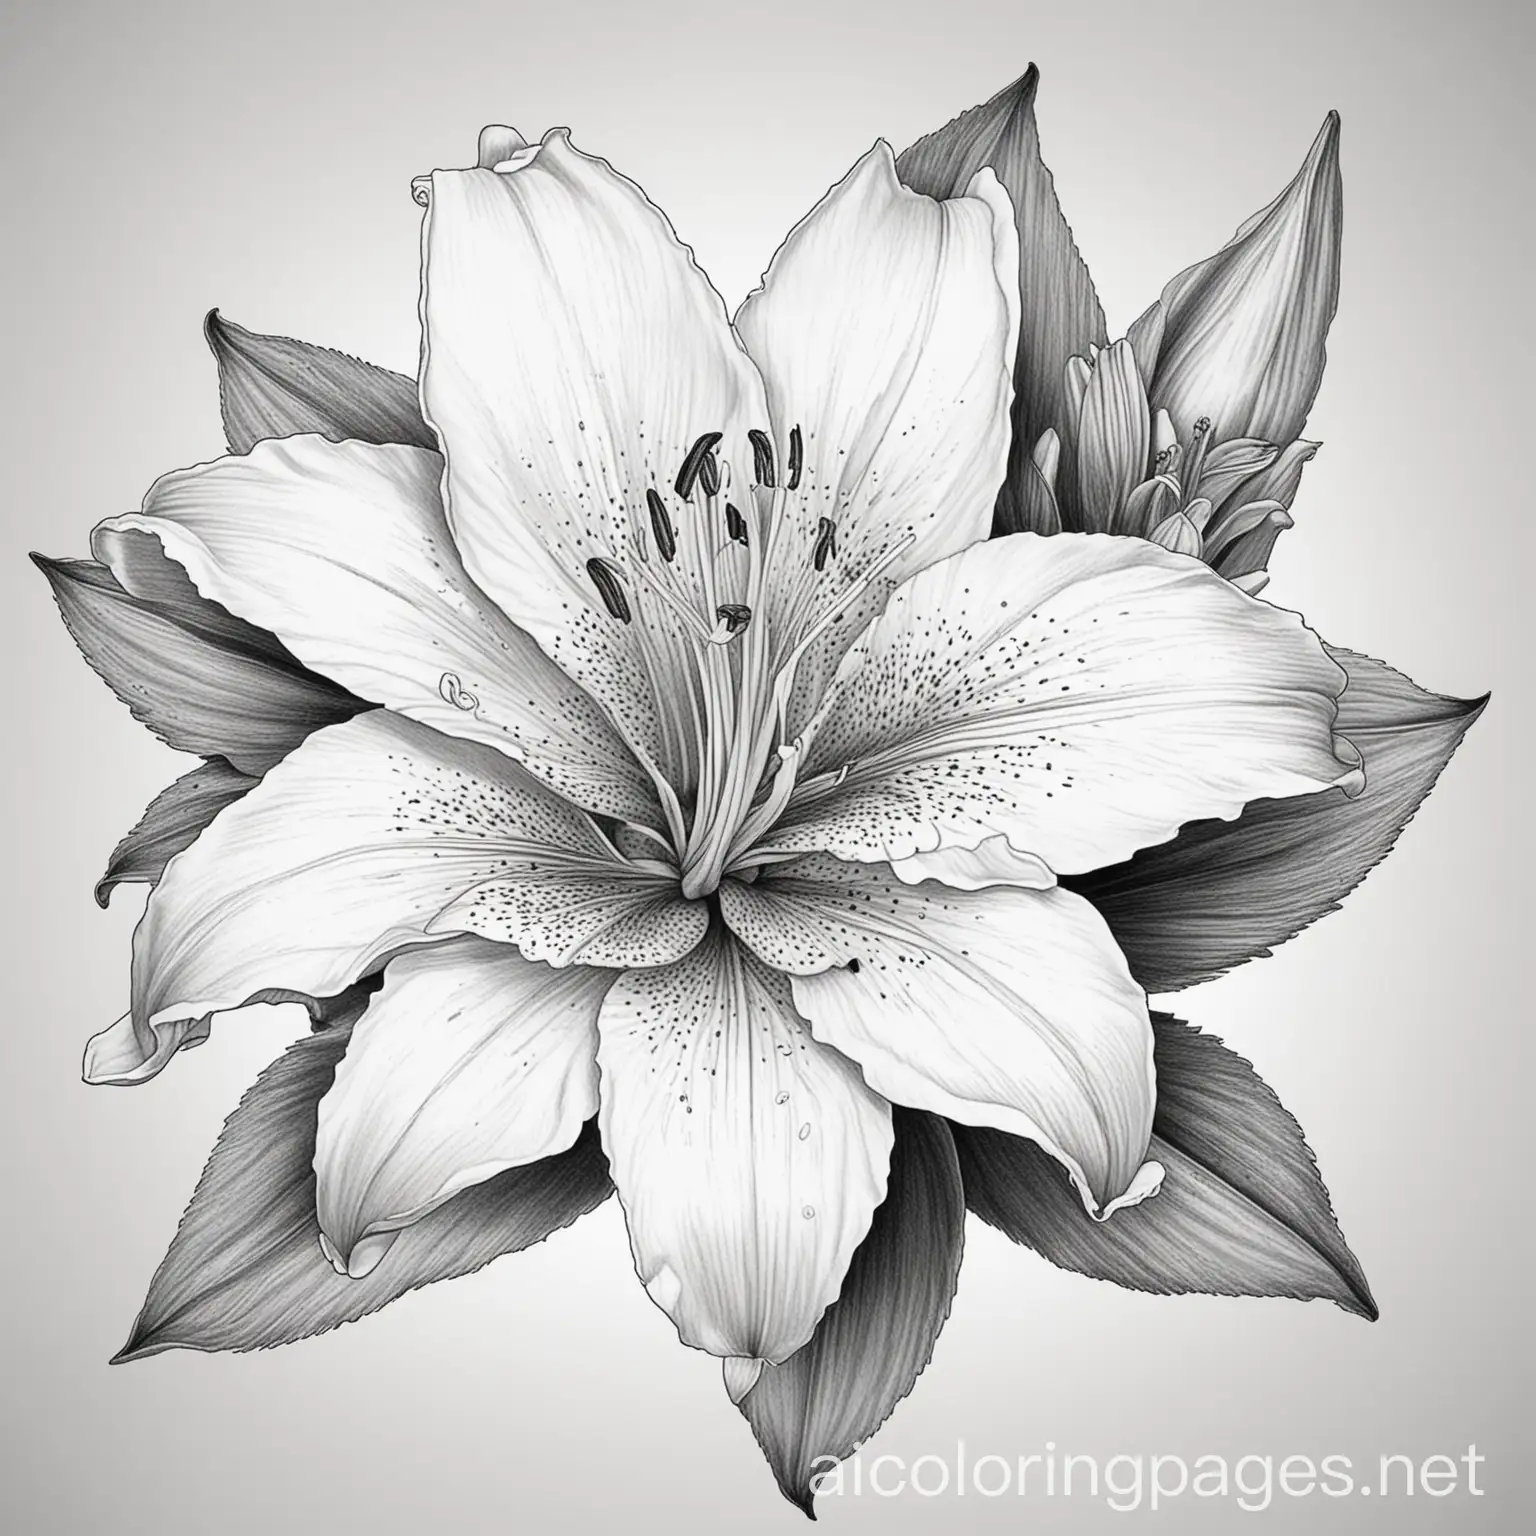 western lily


, black and white, fine lines, no shading, no colour, Coloring Page, black and white, line art, white background, Simplicity, Ample White Space. The background of the coloring page is plain white to make it easy for young children to color within the lines. The outlines of all the subjects are easy to distinguish, making it simple for kids to color without too much difficulty